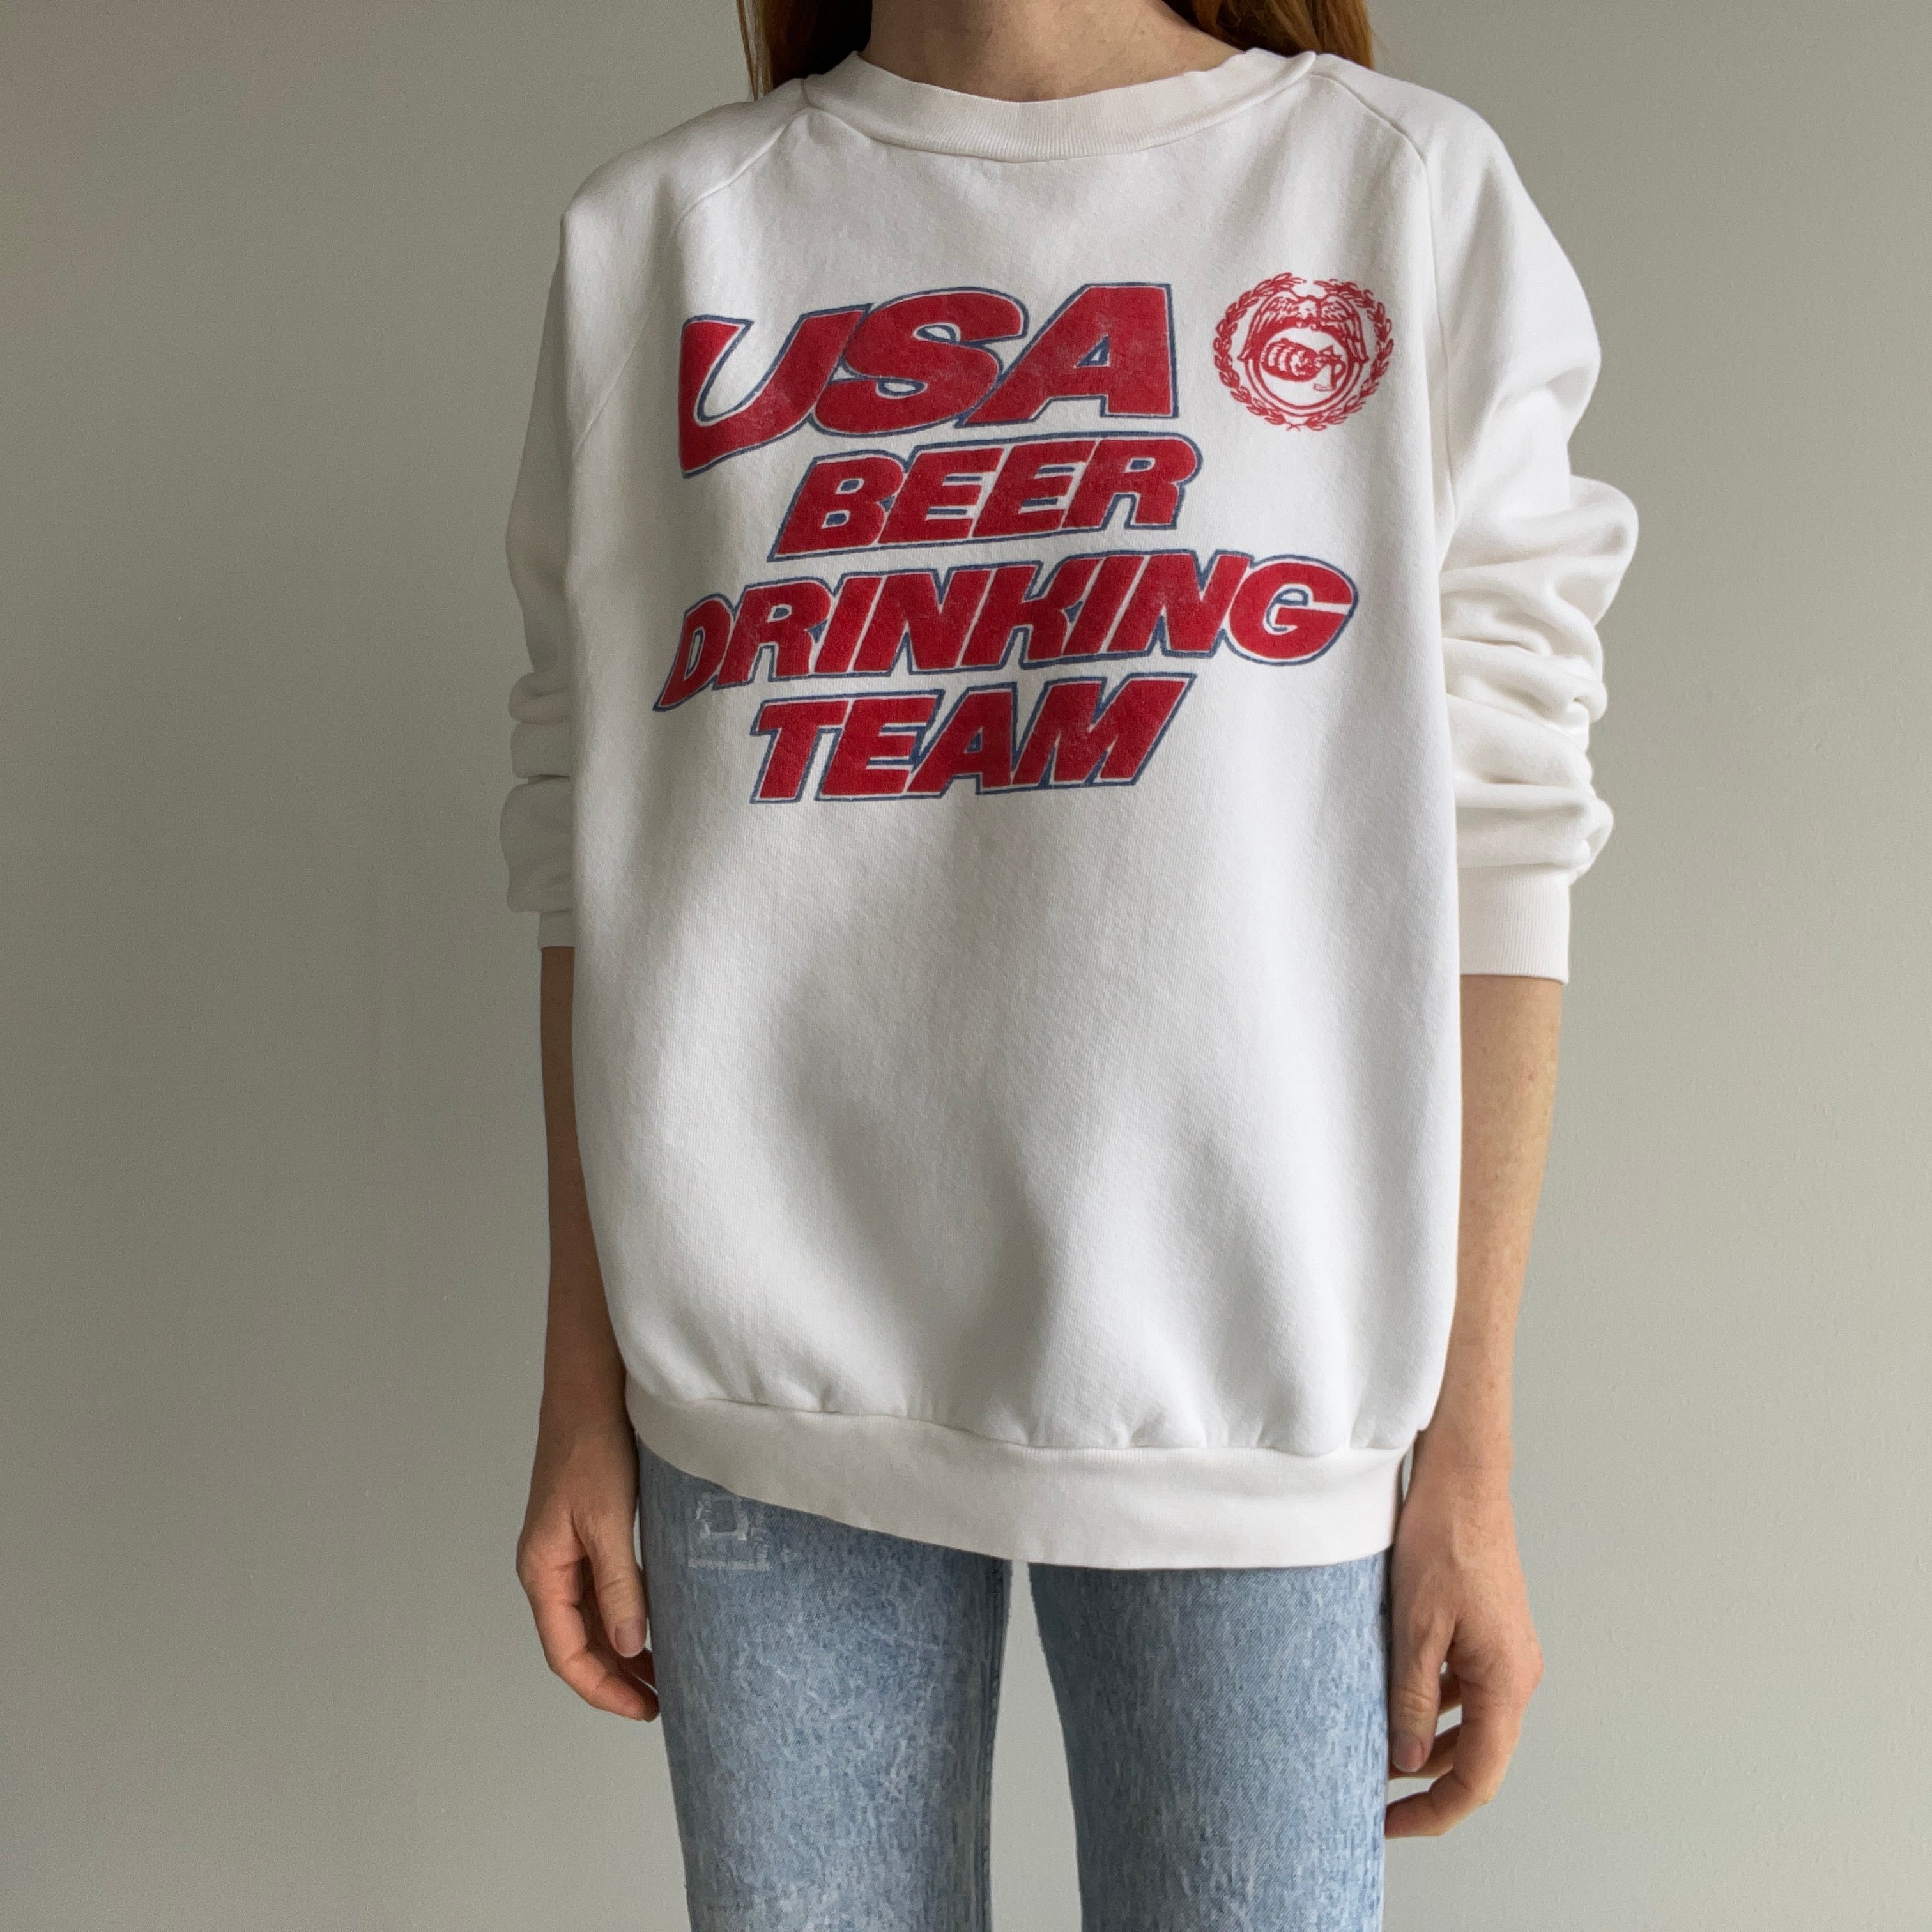 1980s USA Beer Drinking Team Sweatshirt - It Has A Great Fit